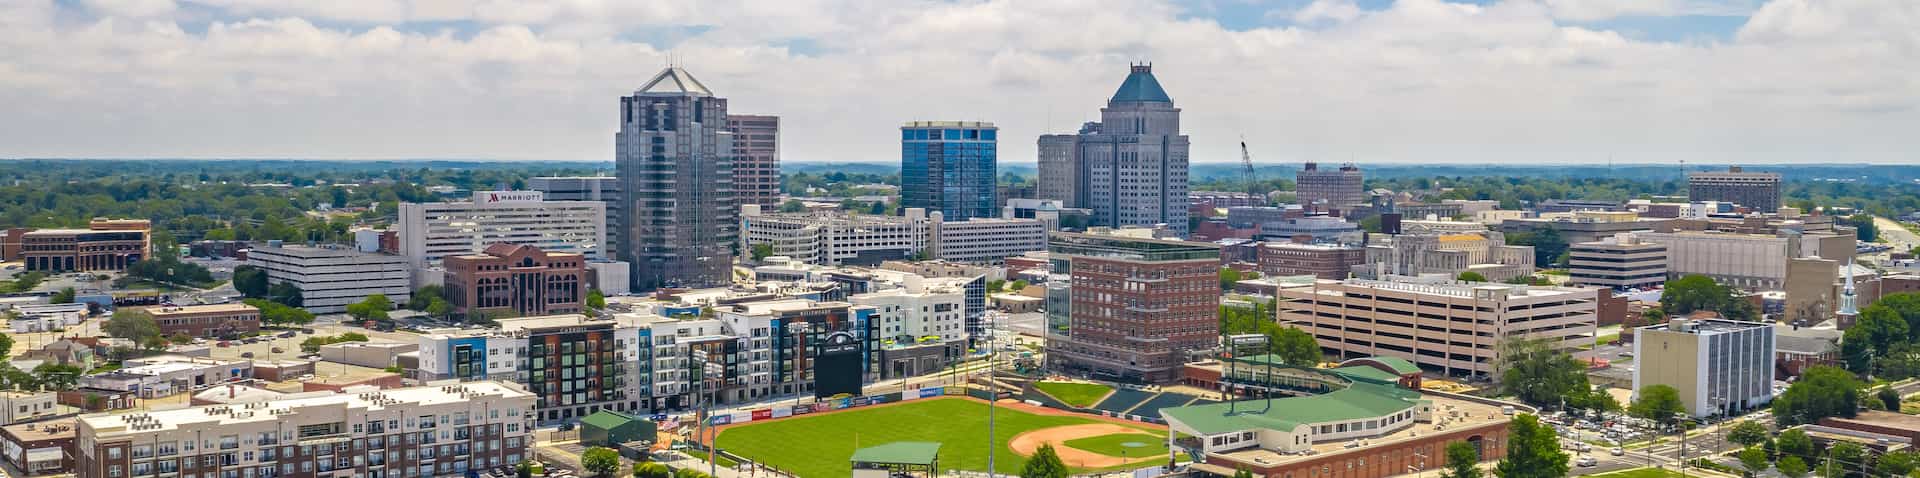 aerial view of downtown Greensboro